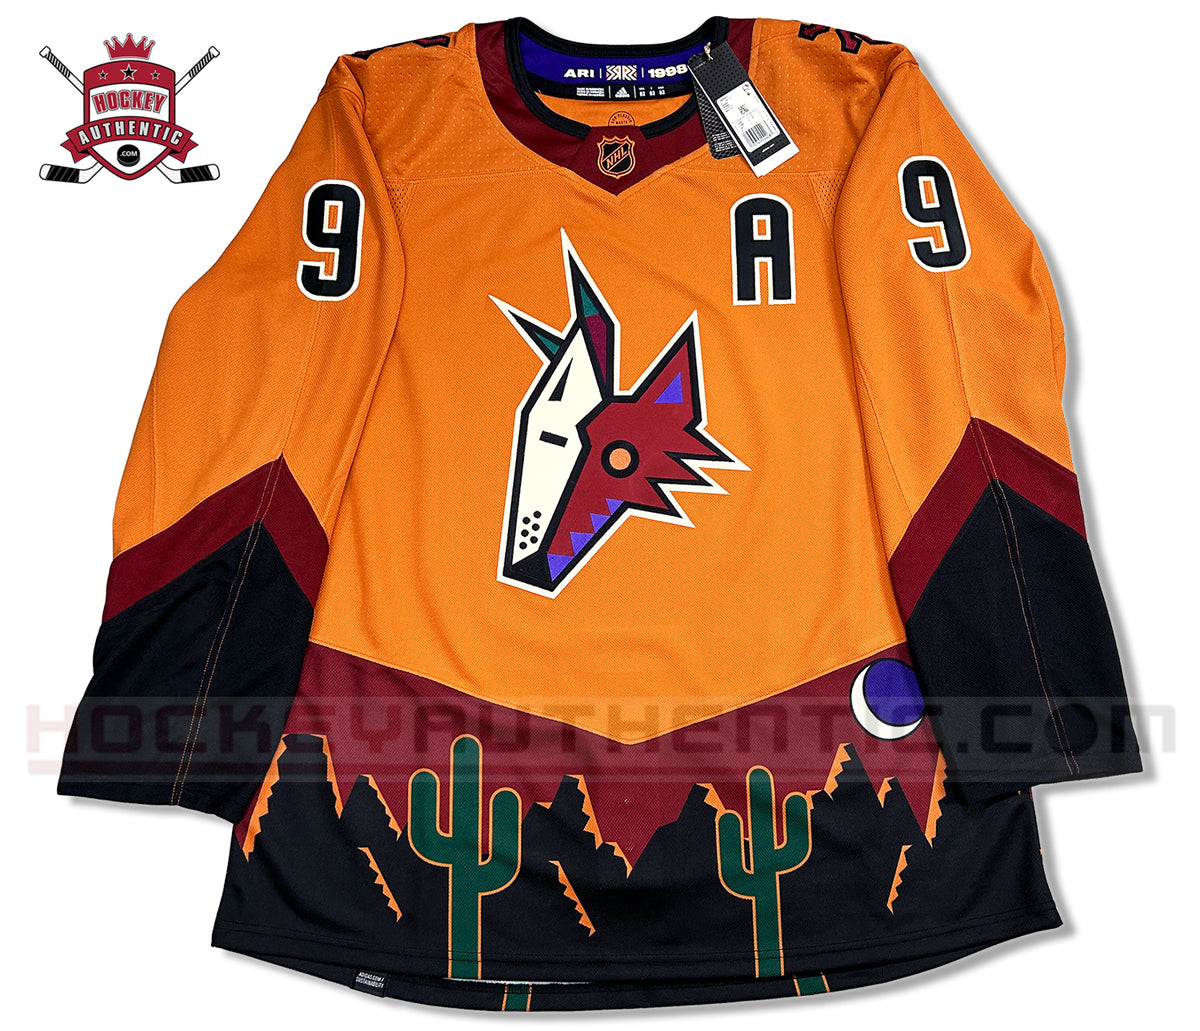 ANY NAME AND NUMBER ARIZONA COYOTES REVERSE RETRO AUTHENTIC ADIDAS